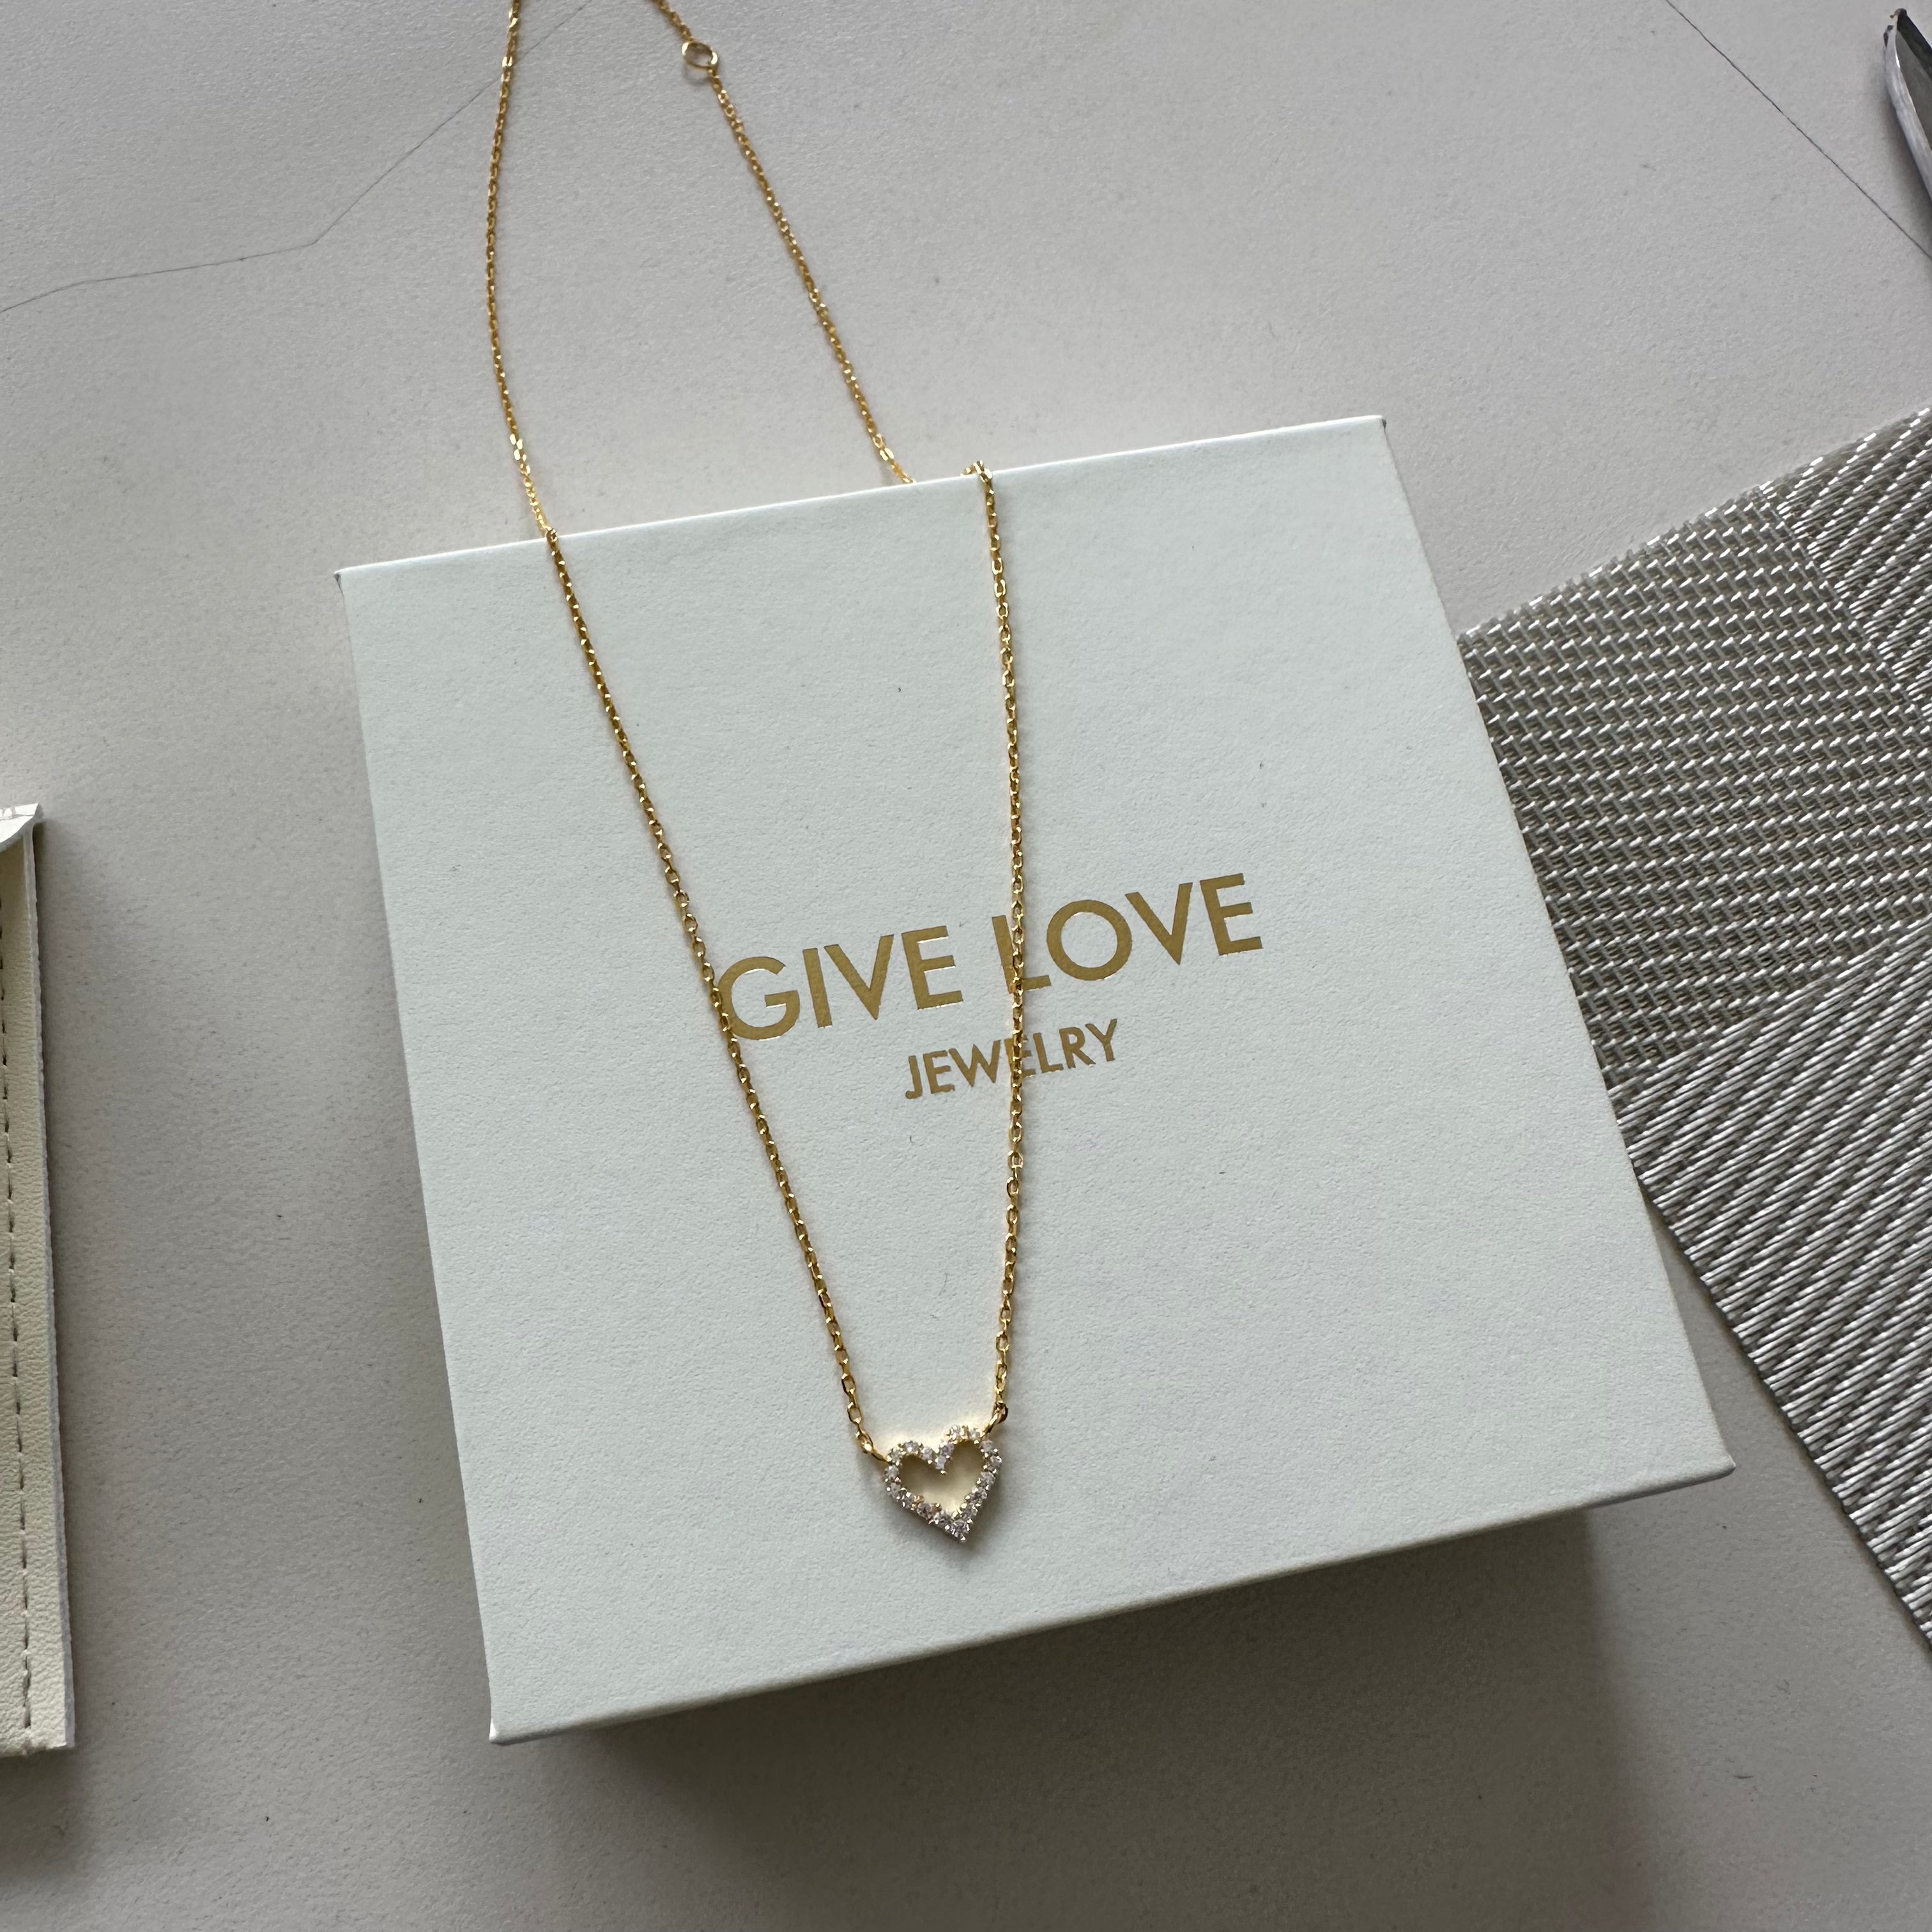 Herz Kette – GIVE JEWELRY LOVE